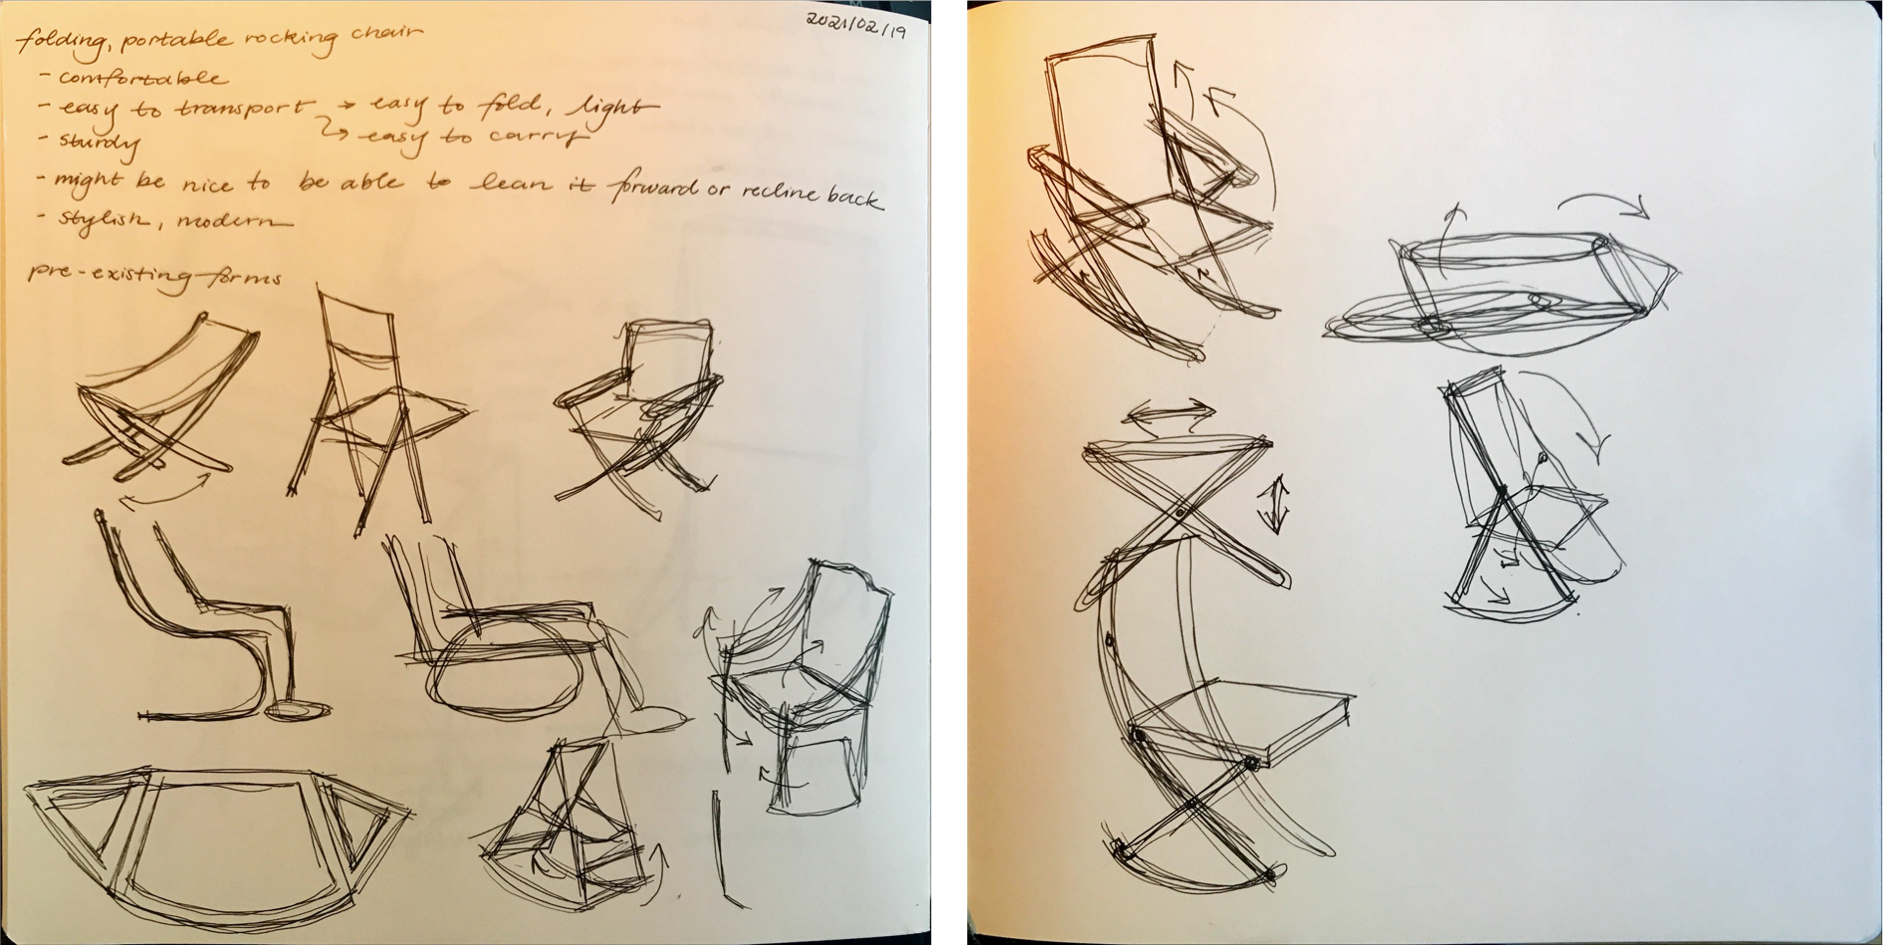 Rocking Chair Ideation